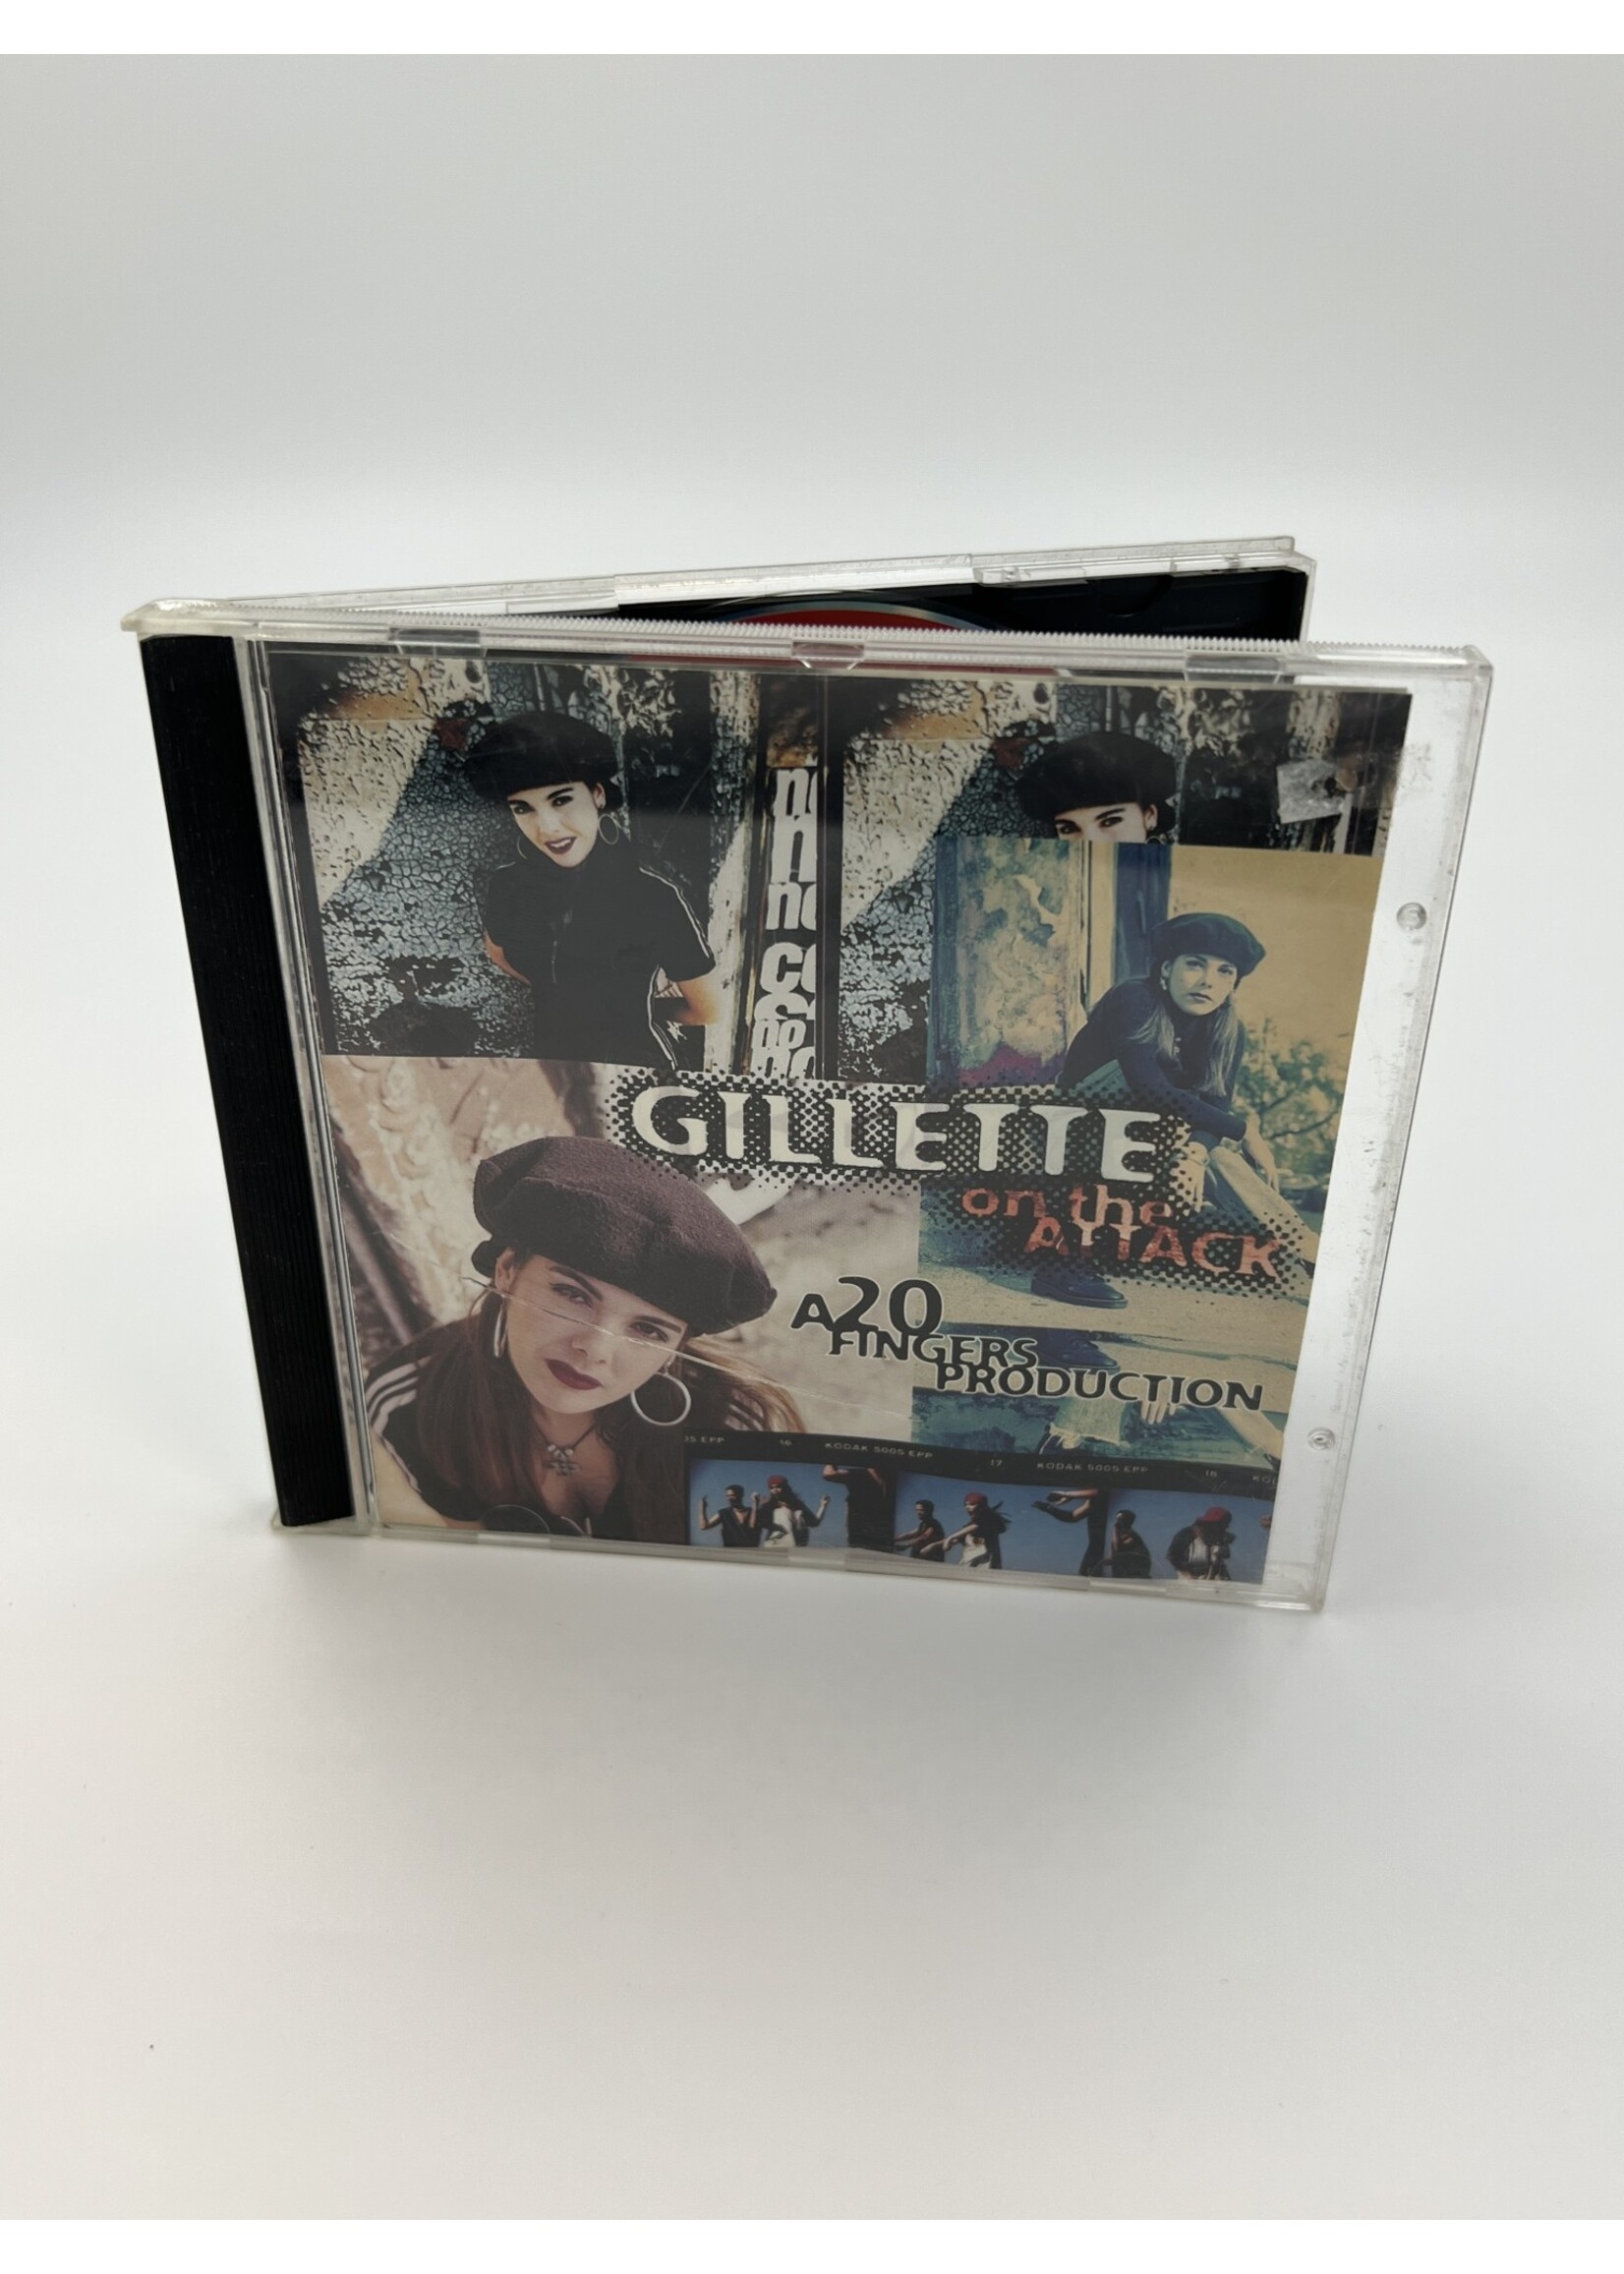 CD Gillette On The Attack Cd